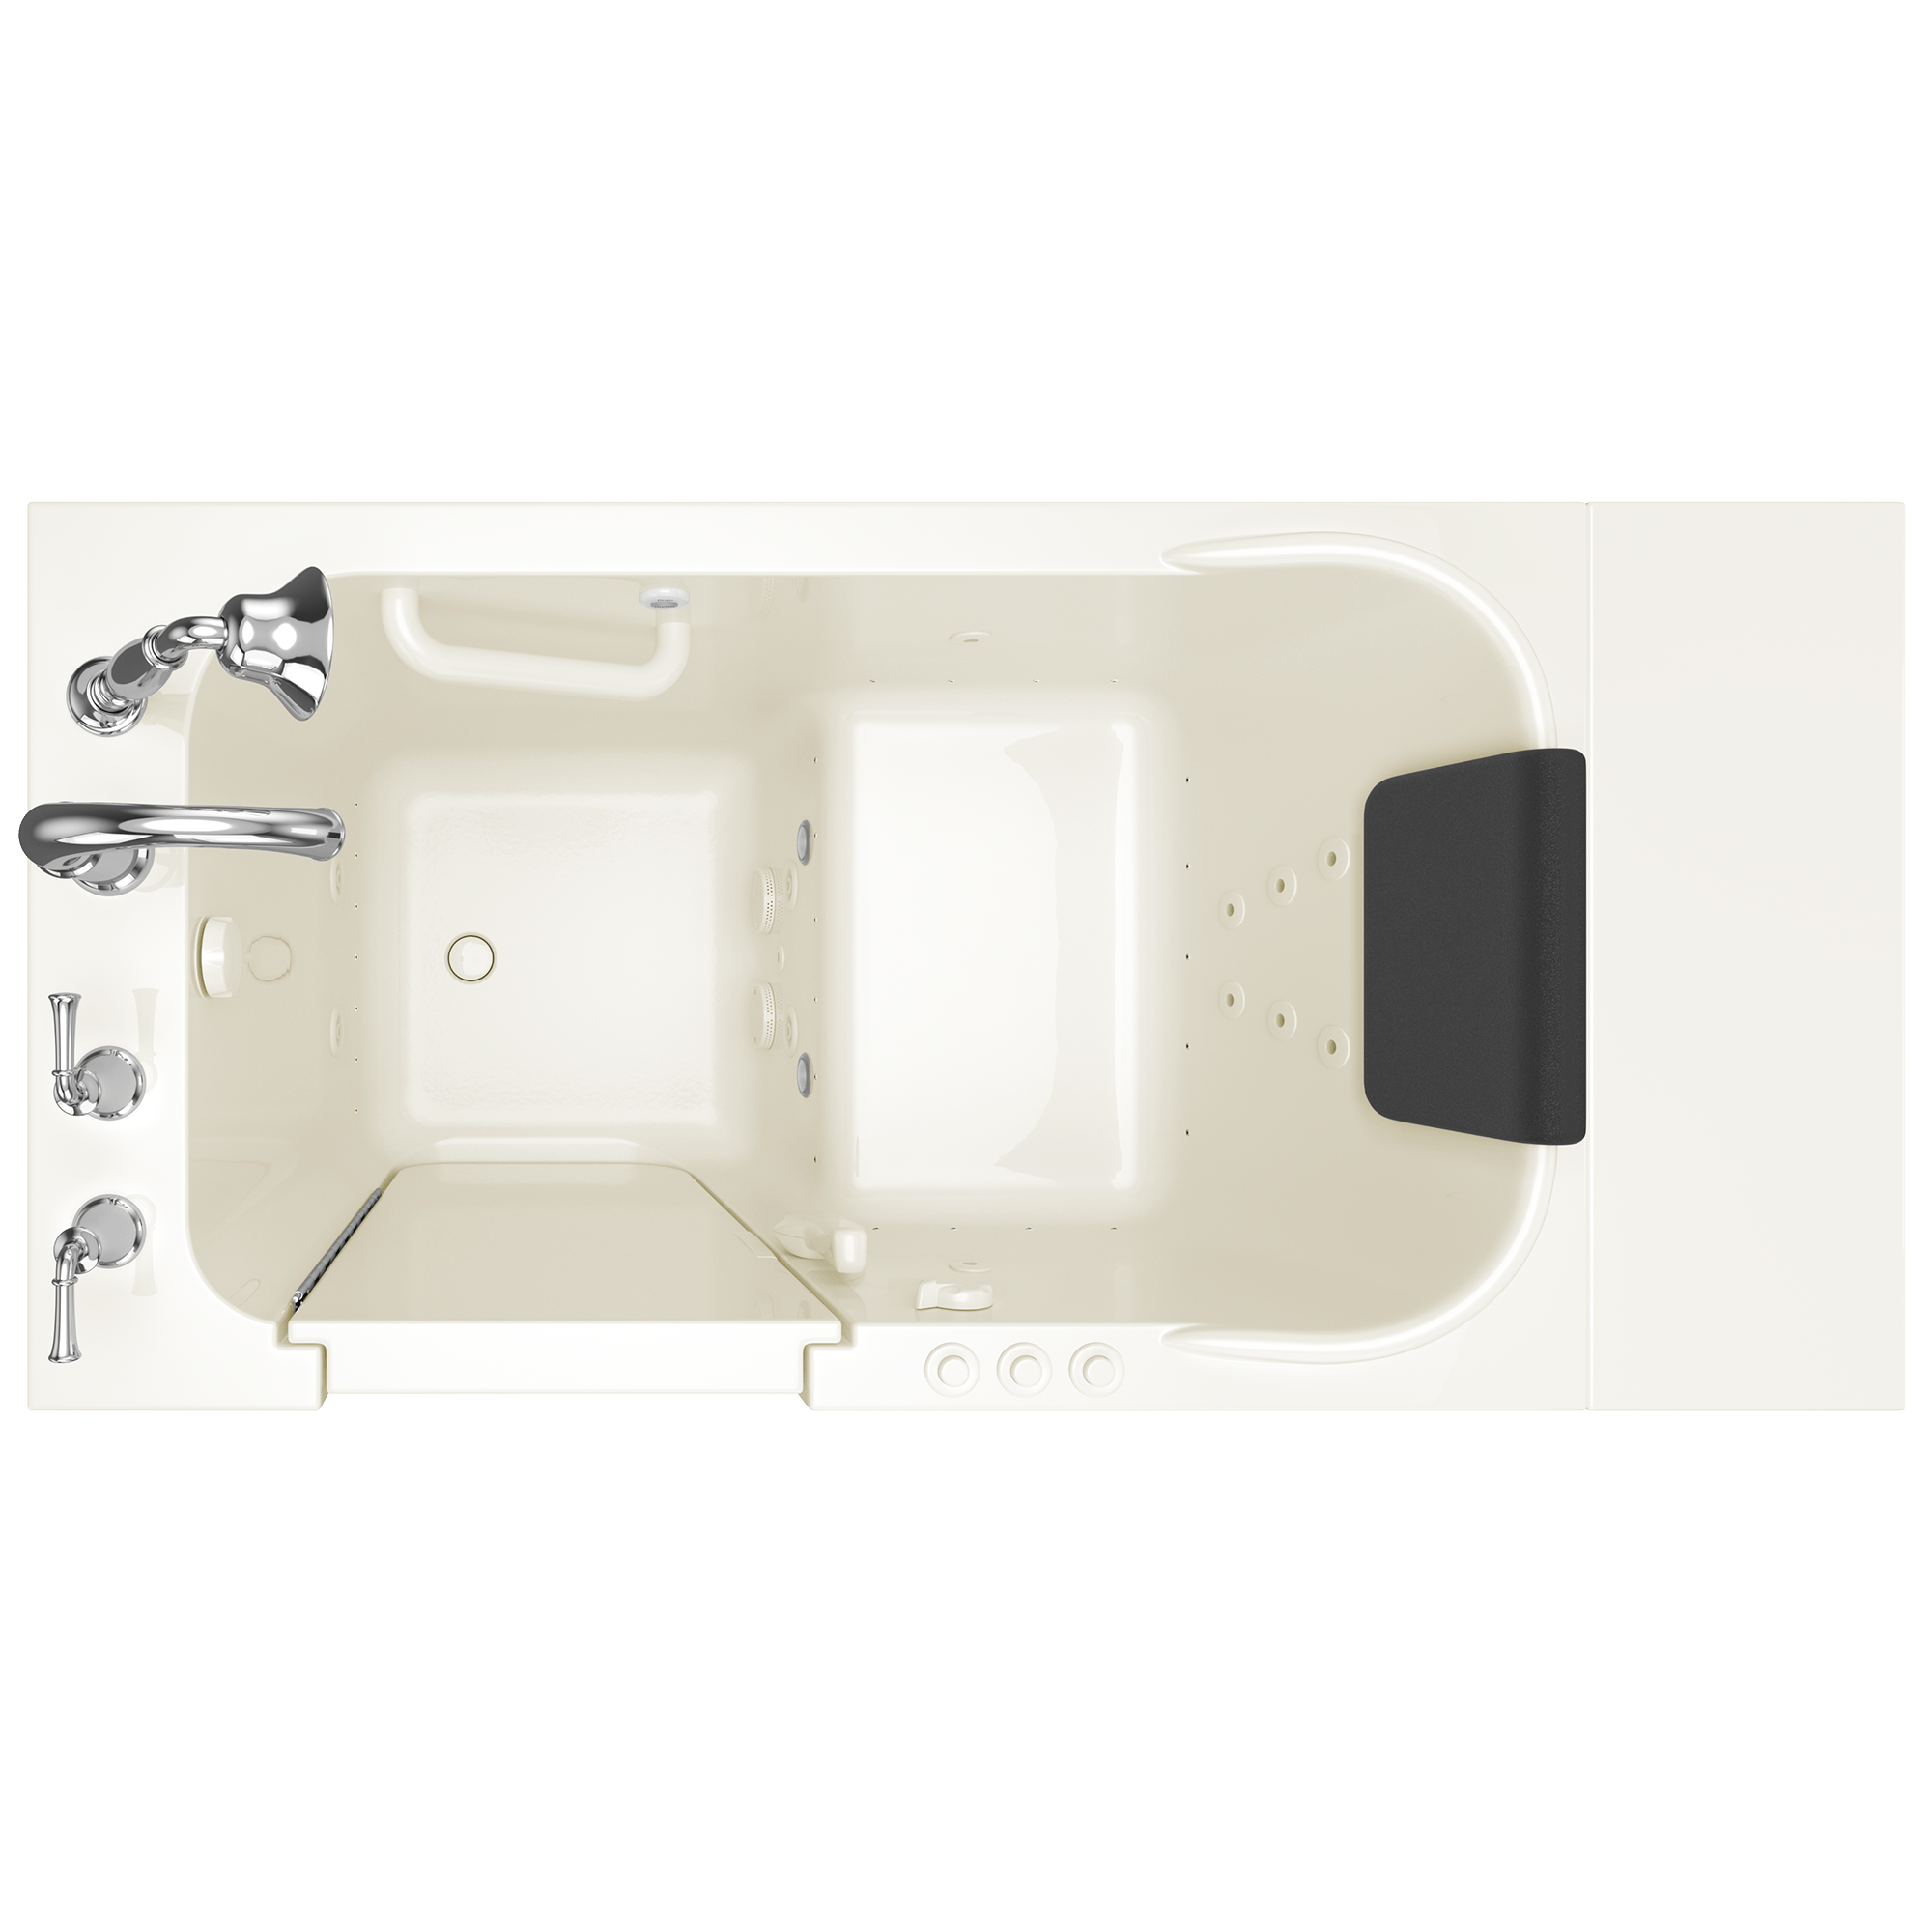 Gelcoat Premium Series 48x28 Inch Walk In Bathtub with Dual Air Massage and Jet Massage System   Left Hand Door and Drain ST BISCUIT